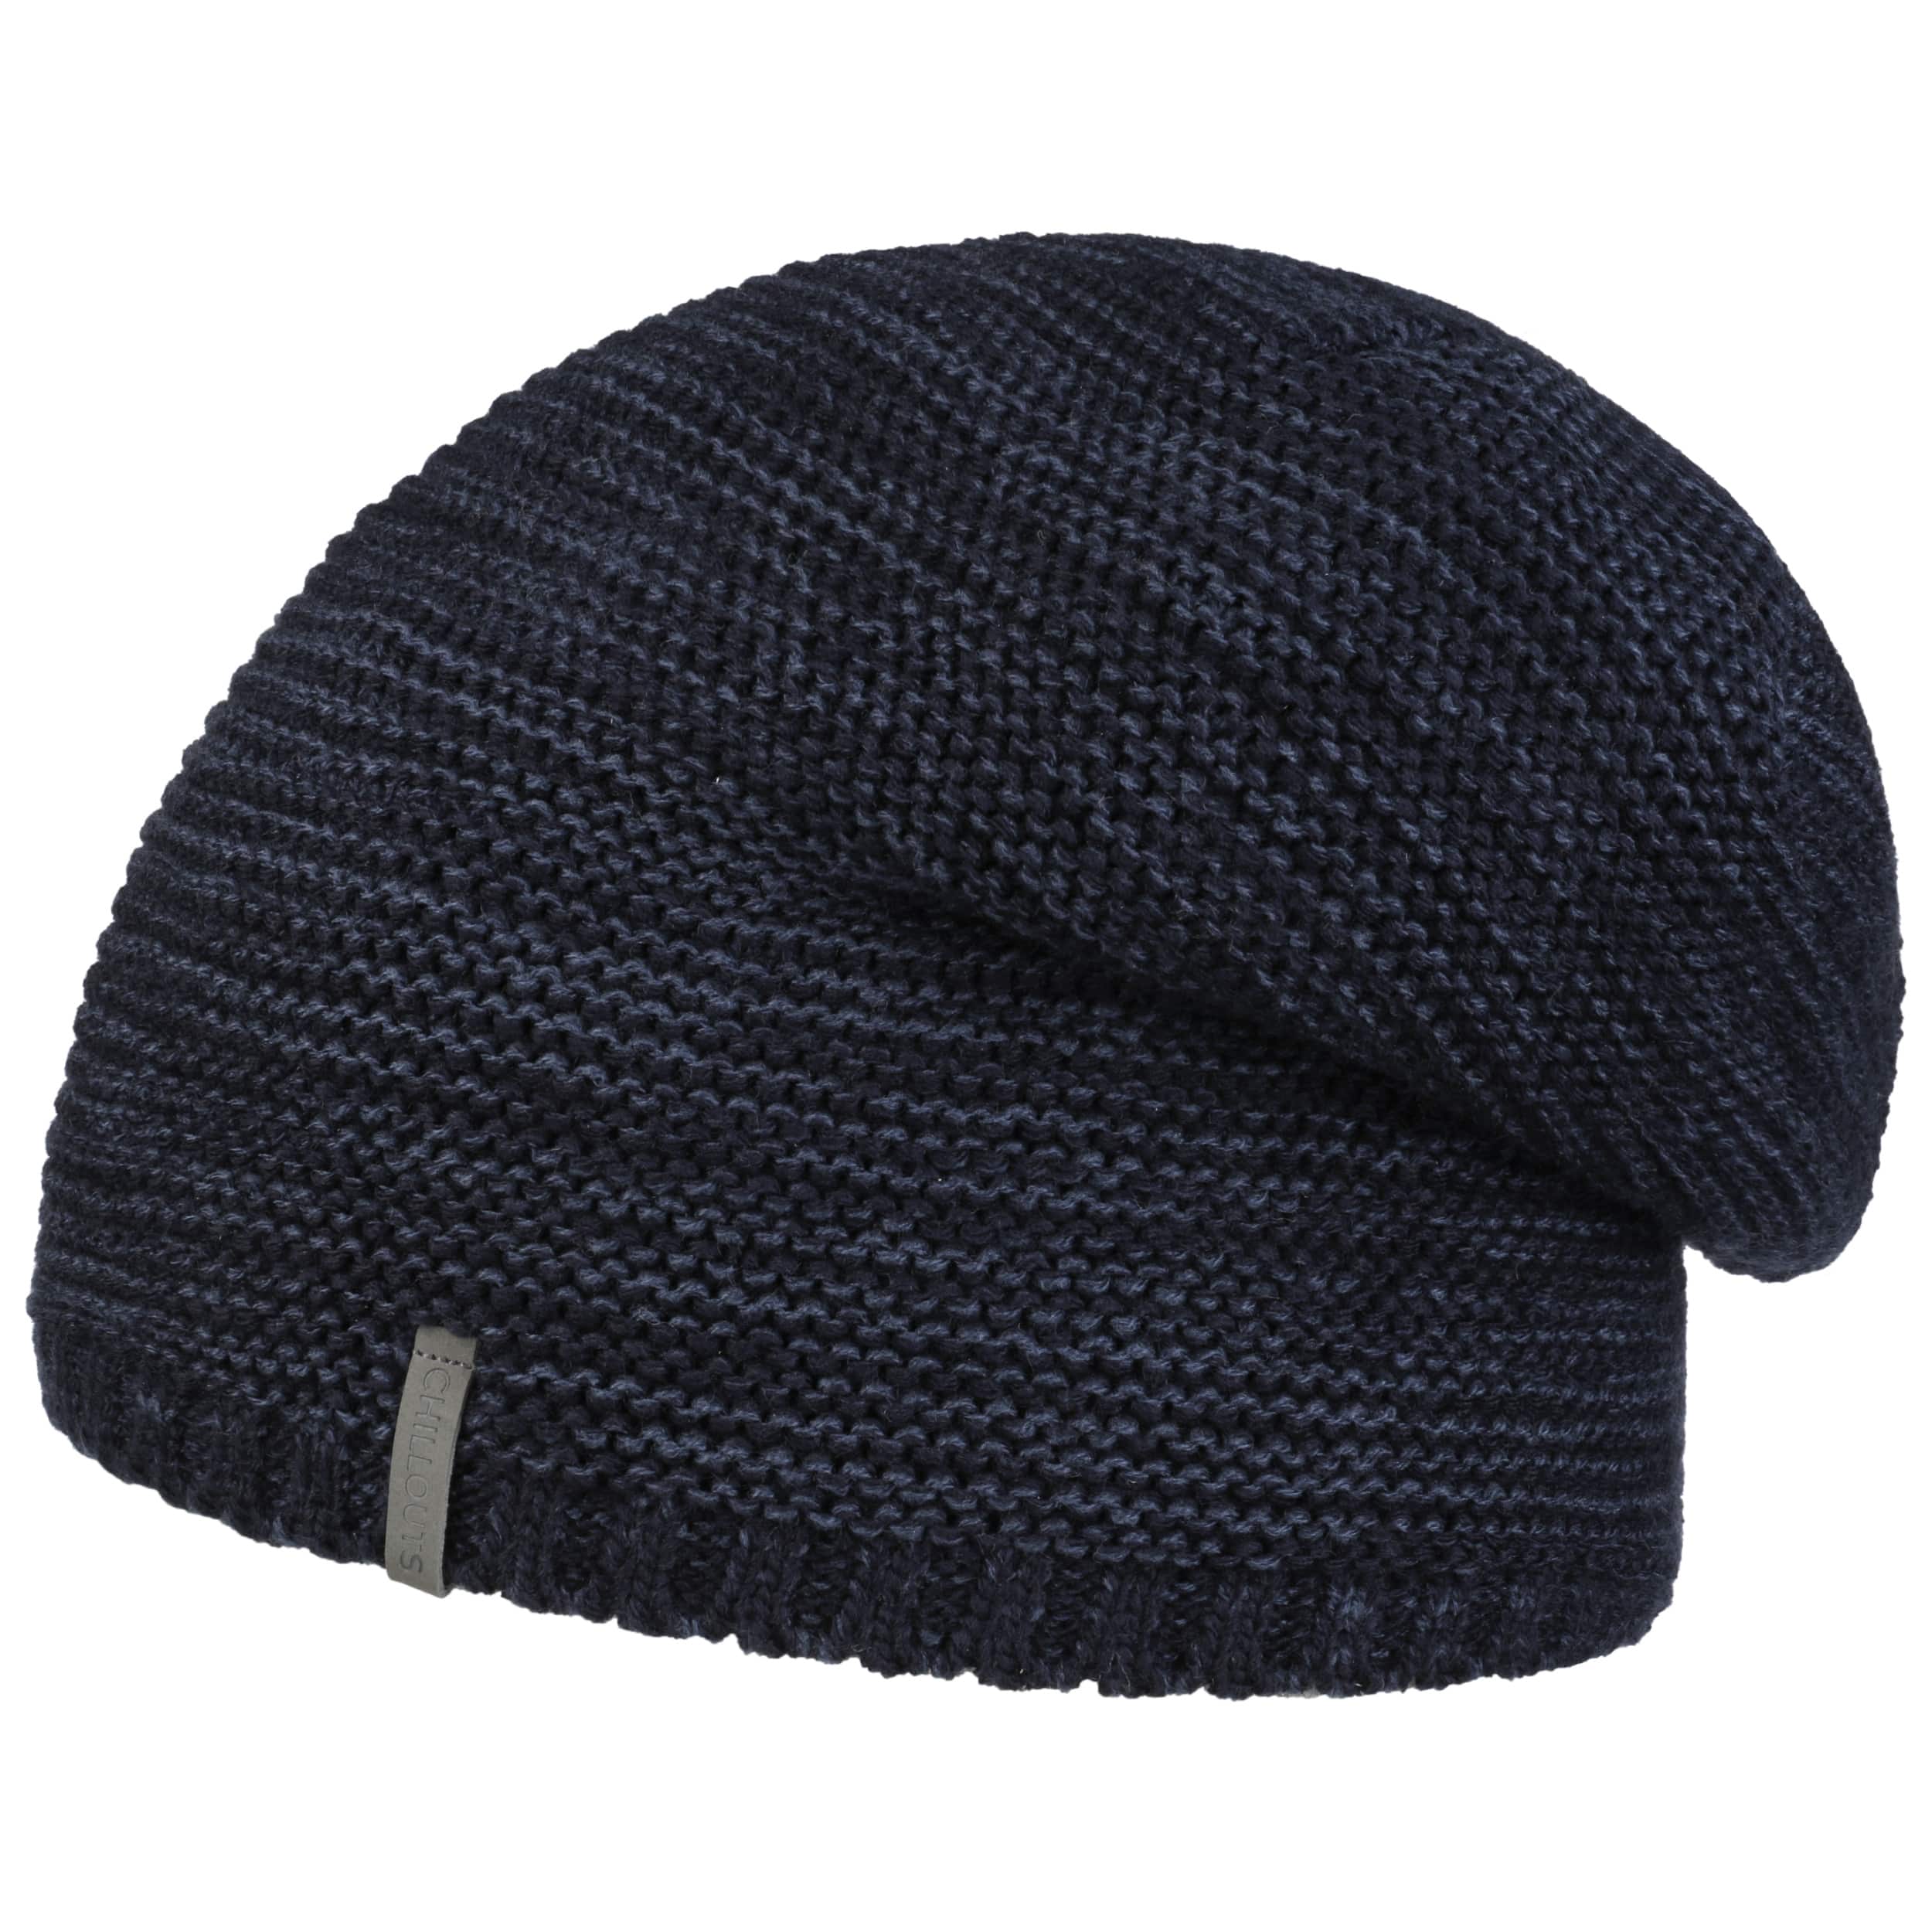 Keith Beanie Hat - Chillouts € by 37,95